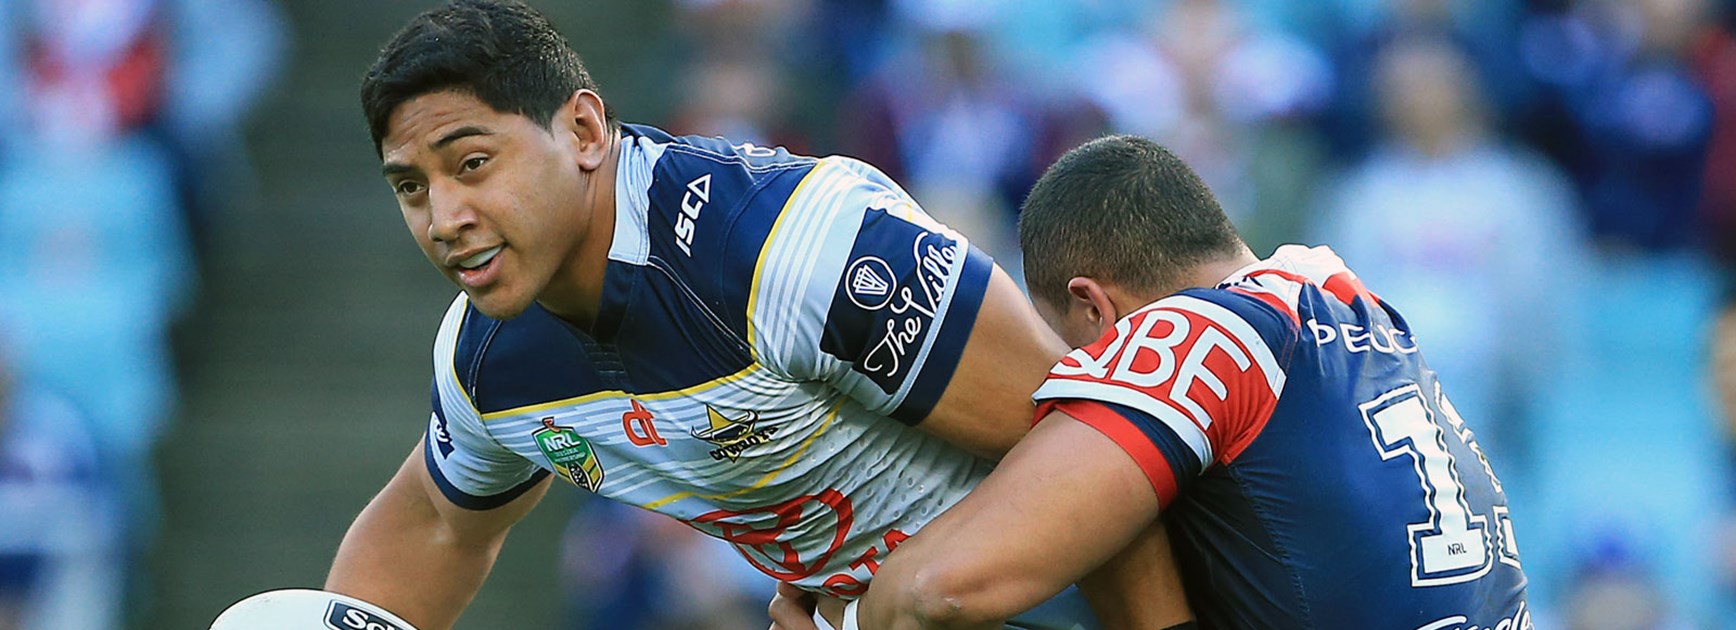 Cowboys lock Jason Taumalolo against the Roosters in Round 23.